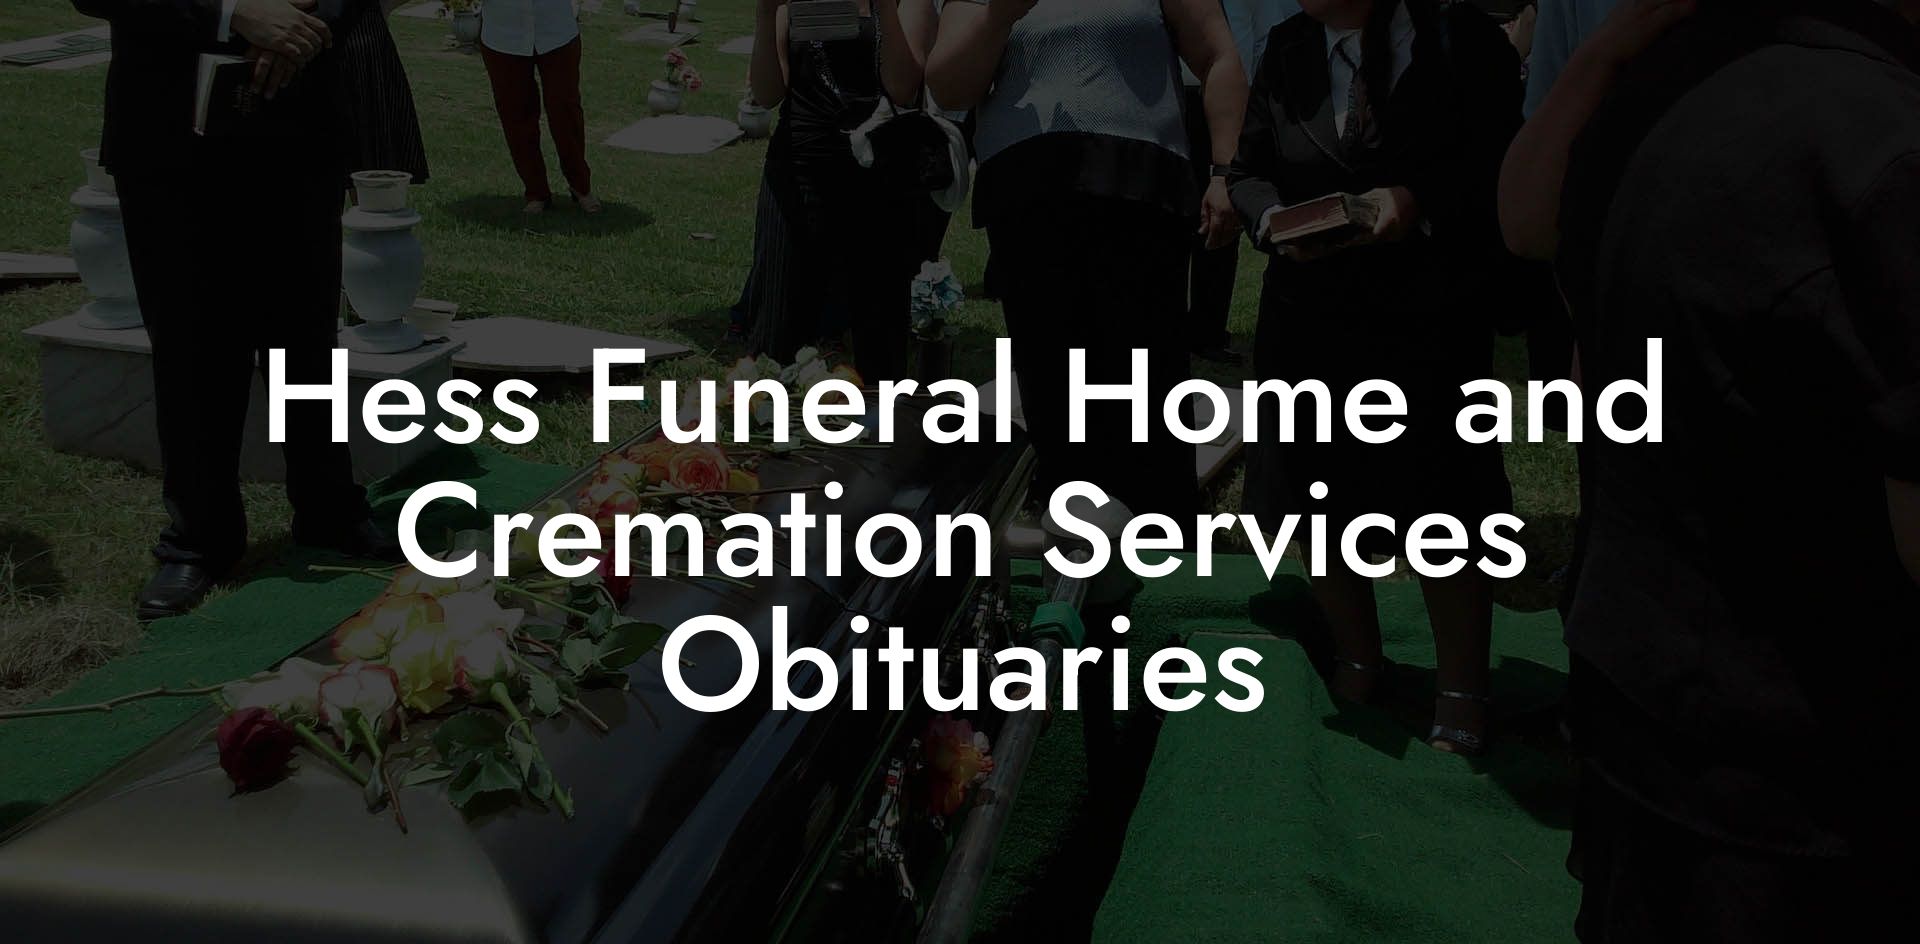 Hess Funeral Home and Cremation Services Obituaries